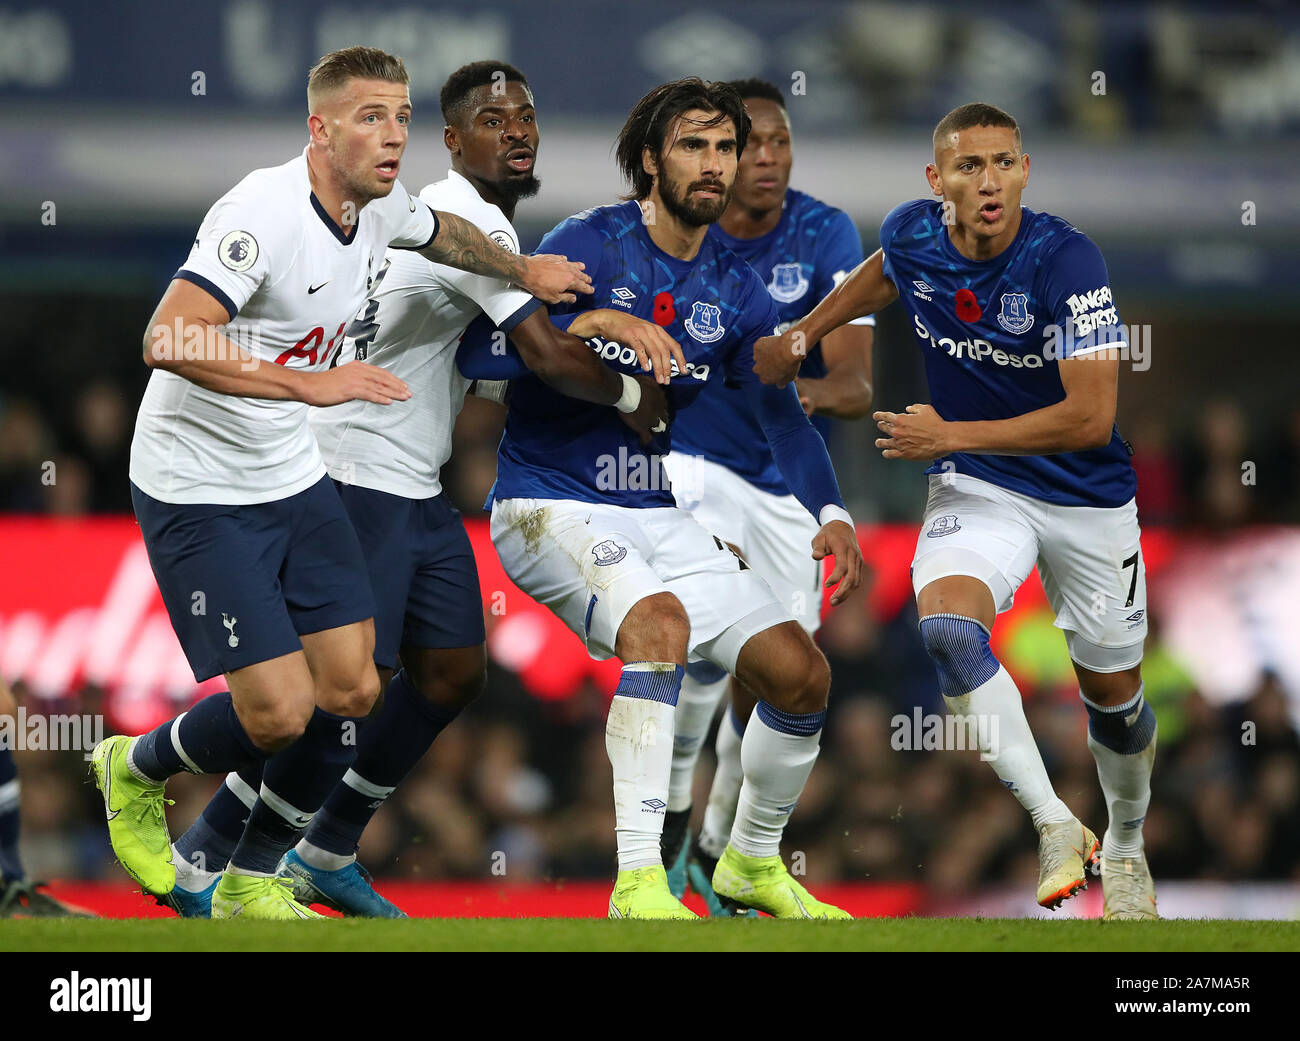 Tottenham Hotspur's Toby Alderweireld (left) and Serge Aurier battle with Everton's Andre Gomes (centre) and Richarlison during the Premier League match at Goodison Park, Liverpool. Stock Photo